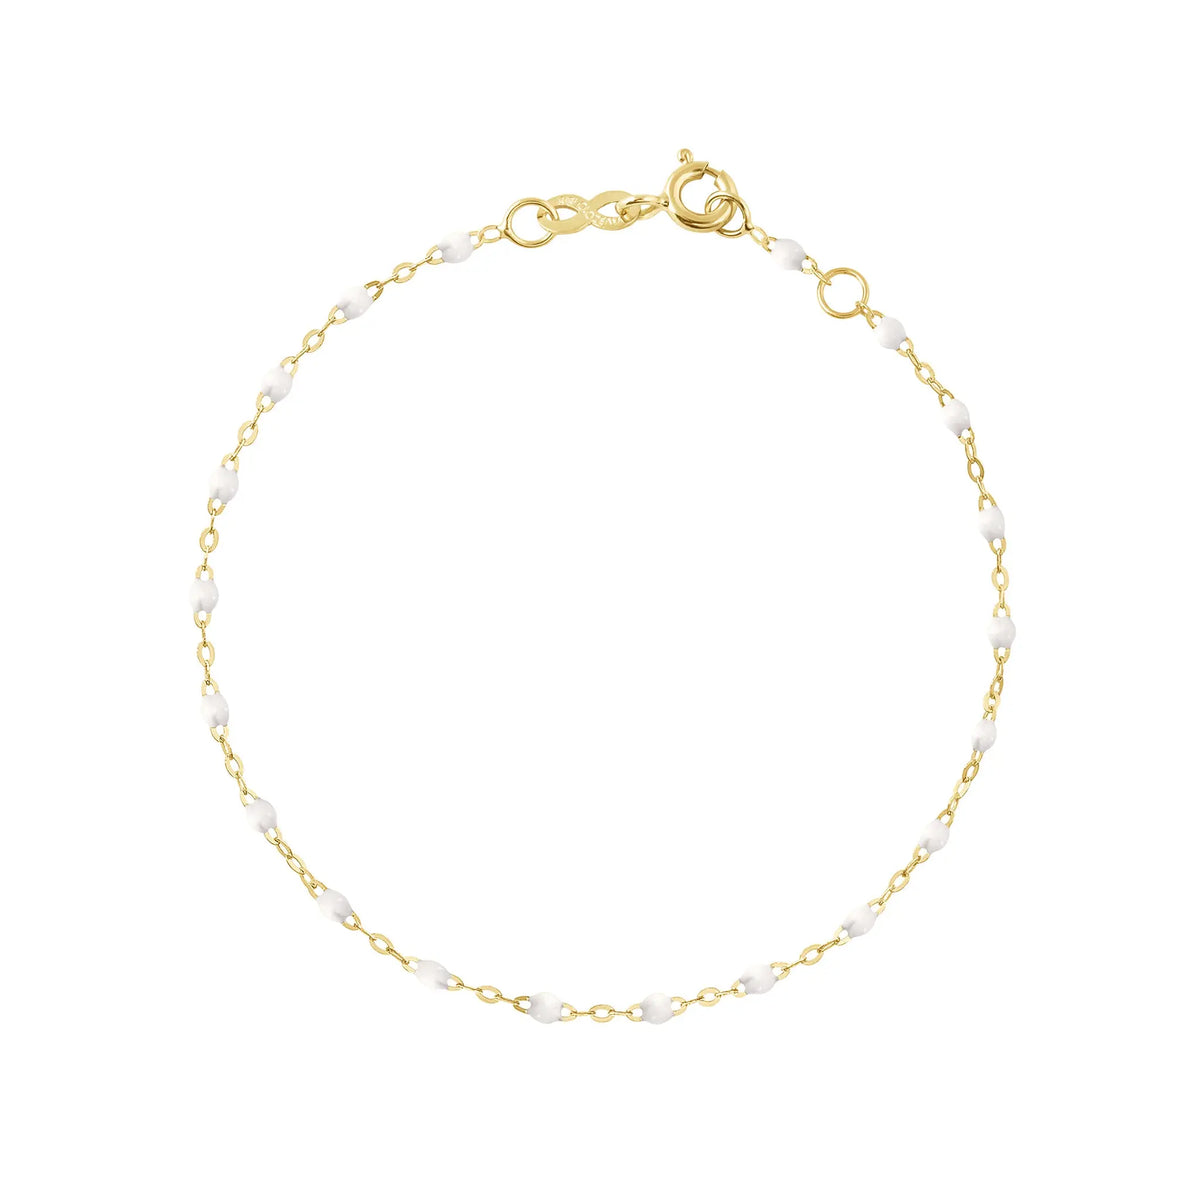 The Classic Gigi bracelet by gigi CLOZEAU features 18K Yellow Gold, and unique White jewels for a simple, everyday look.   Each jewel is unique, artisanally made in their family-owned workshop. 18K yellow gold and resin. The bracelet measures 6.7 inches with adjustable clasp at 6.3 inches.